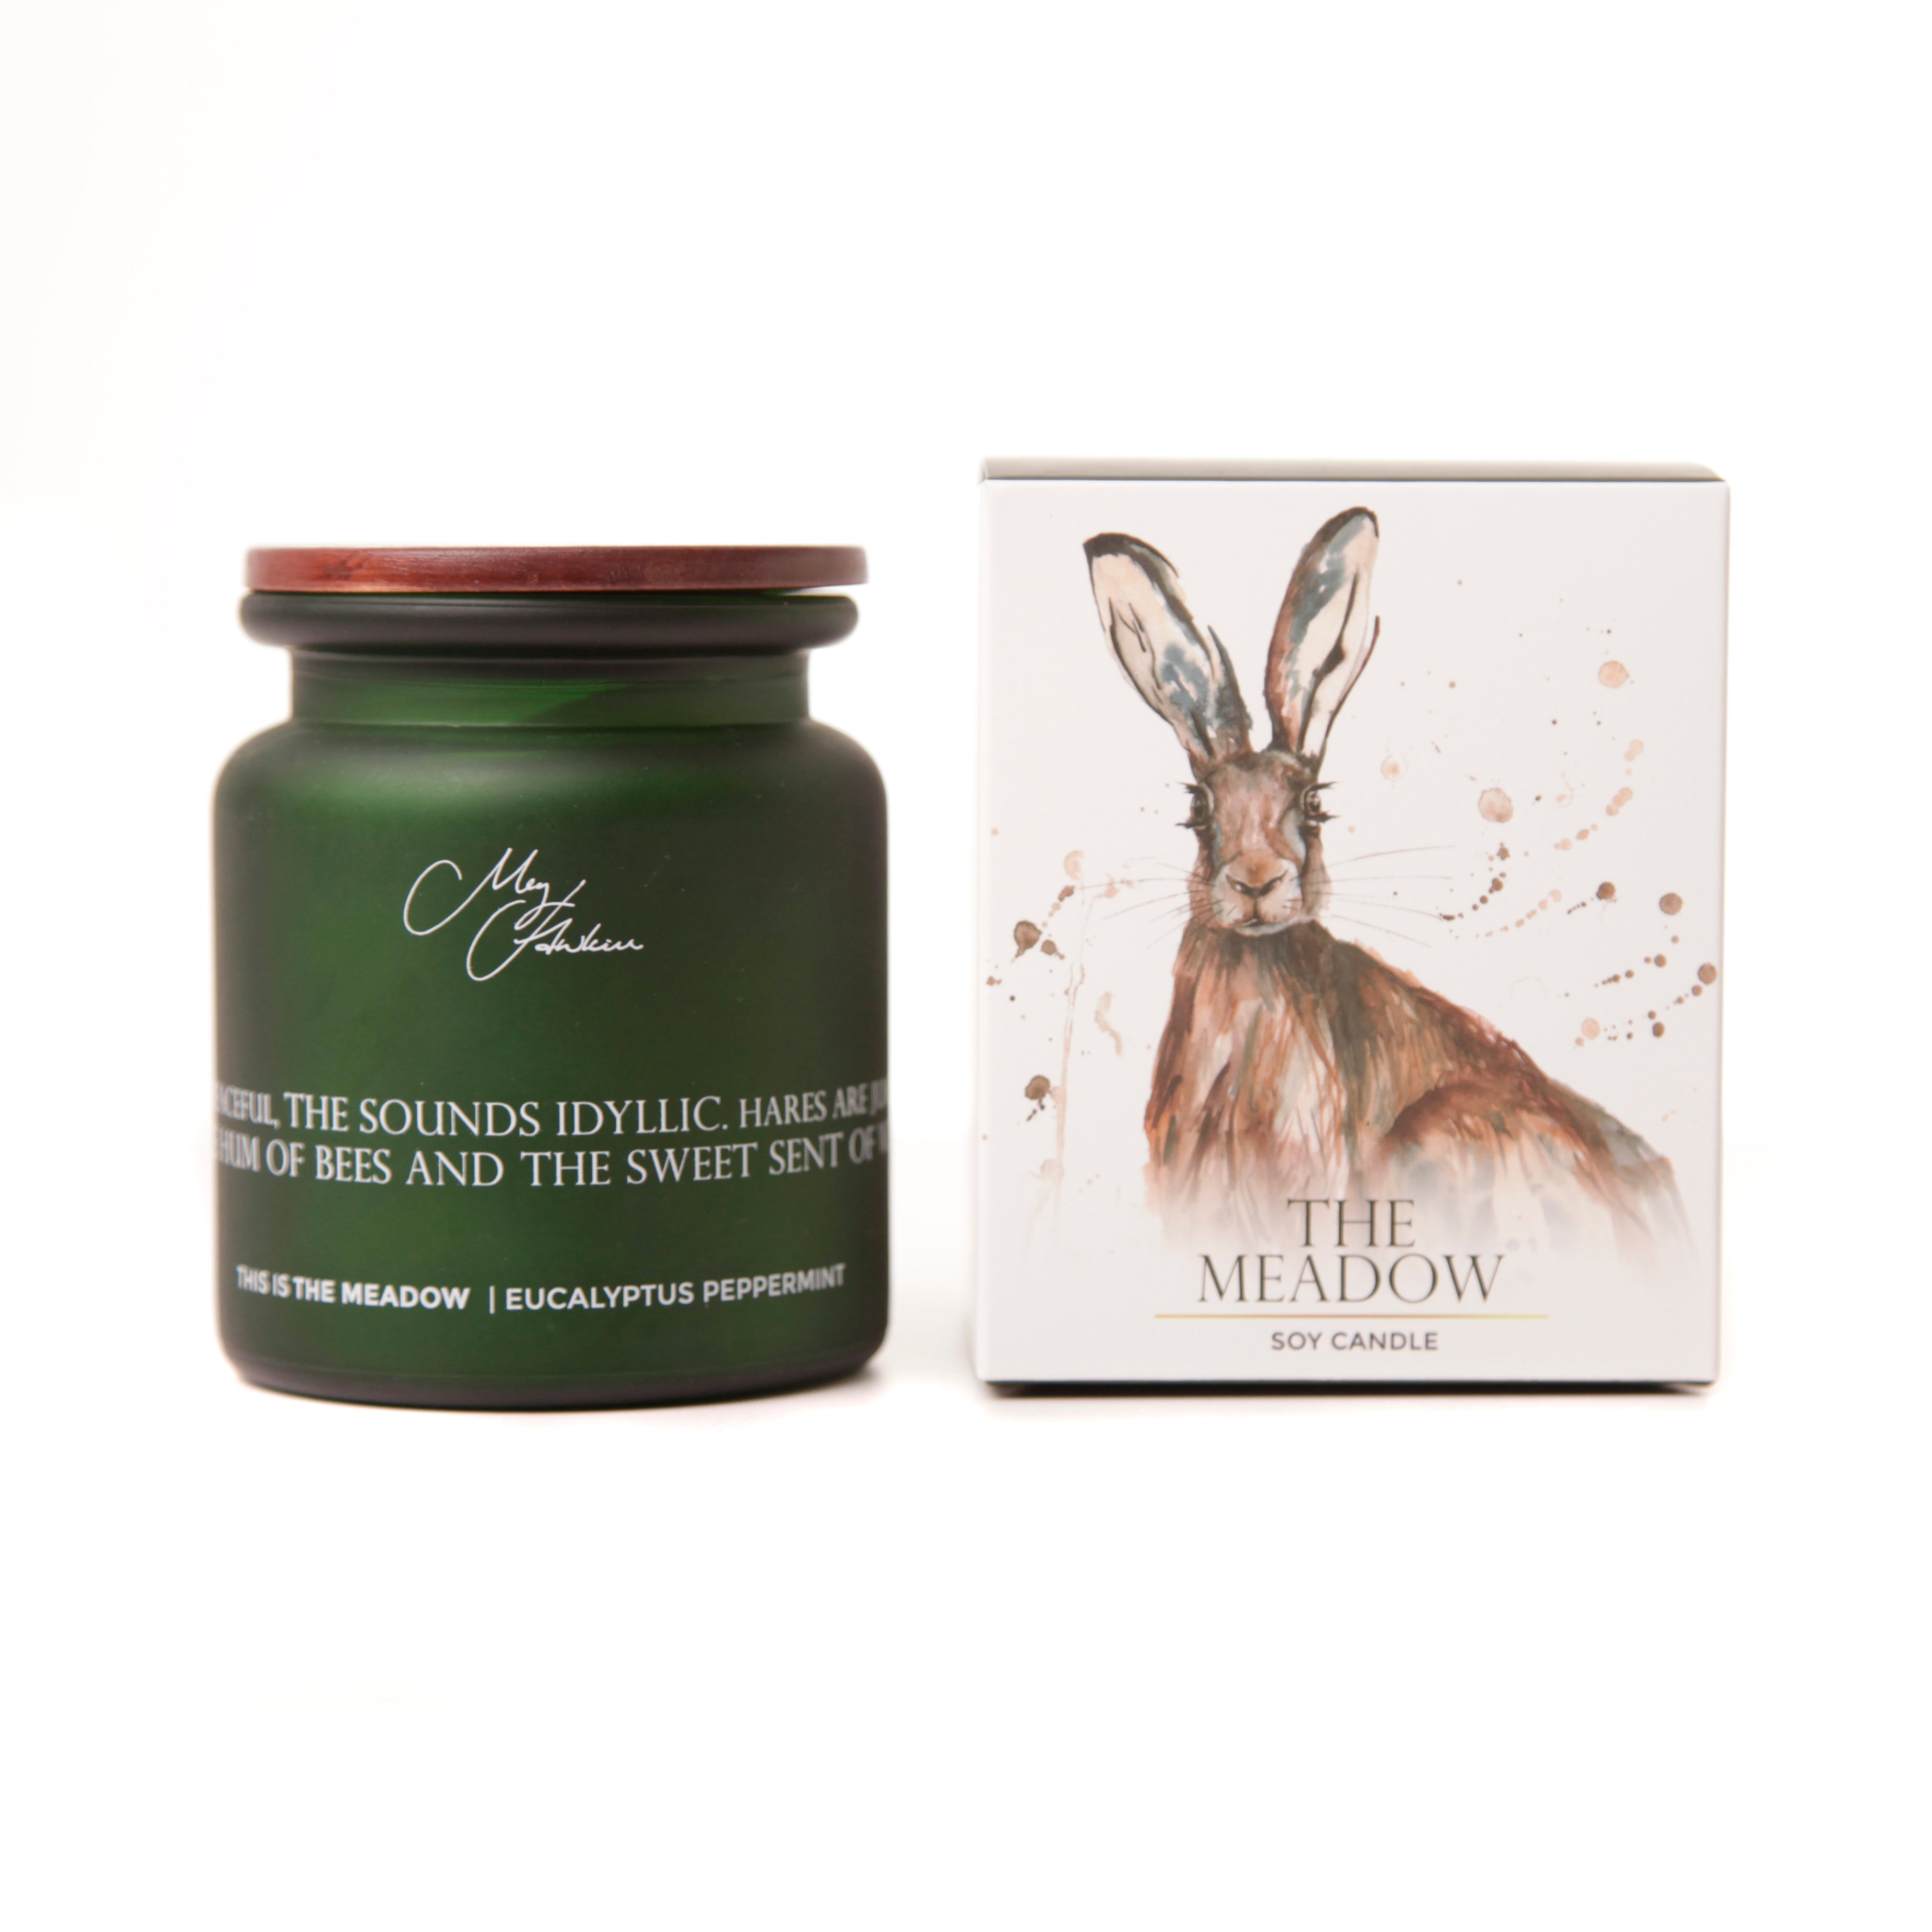 'The Meadow' Hare Design Candle